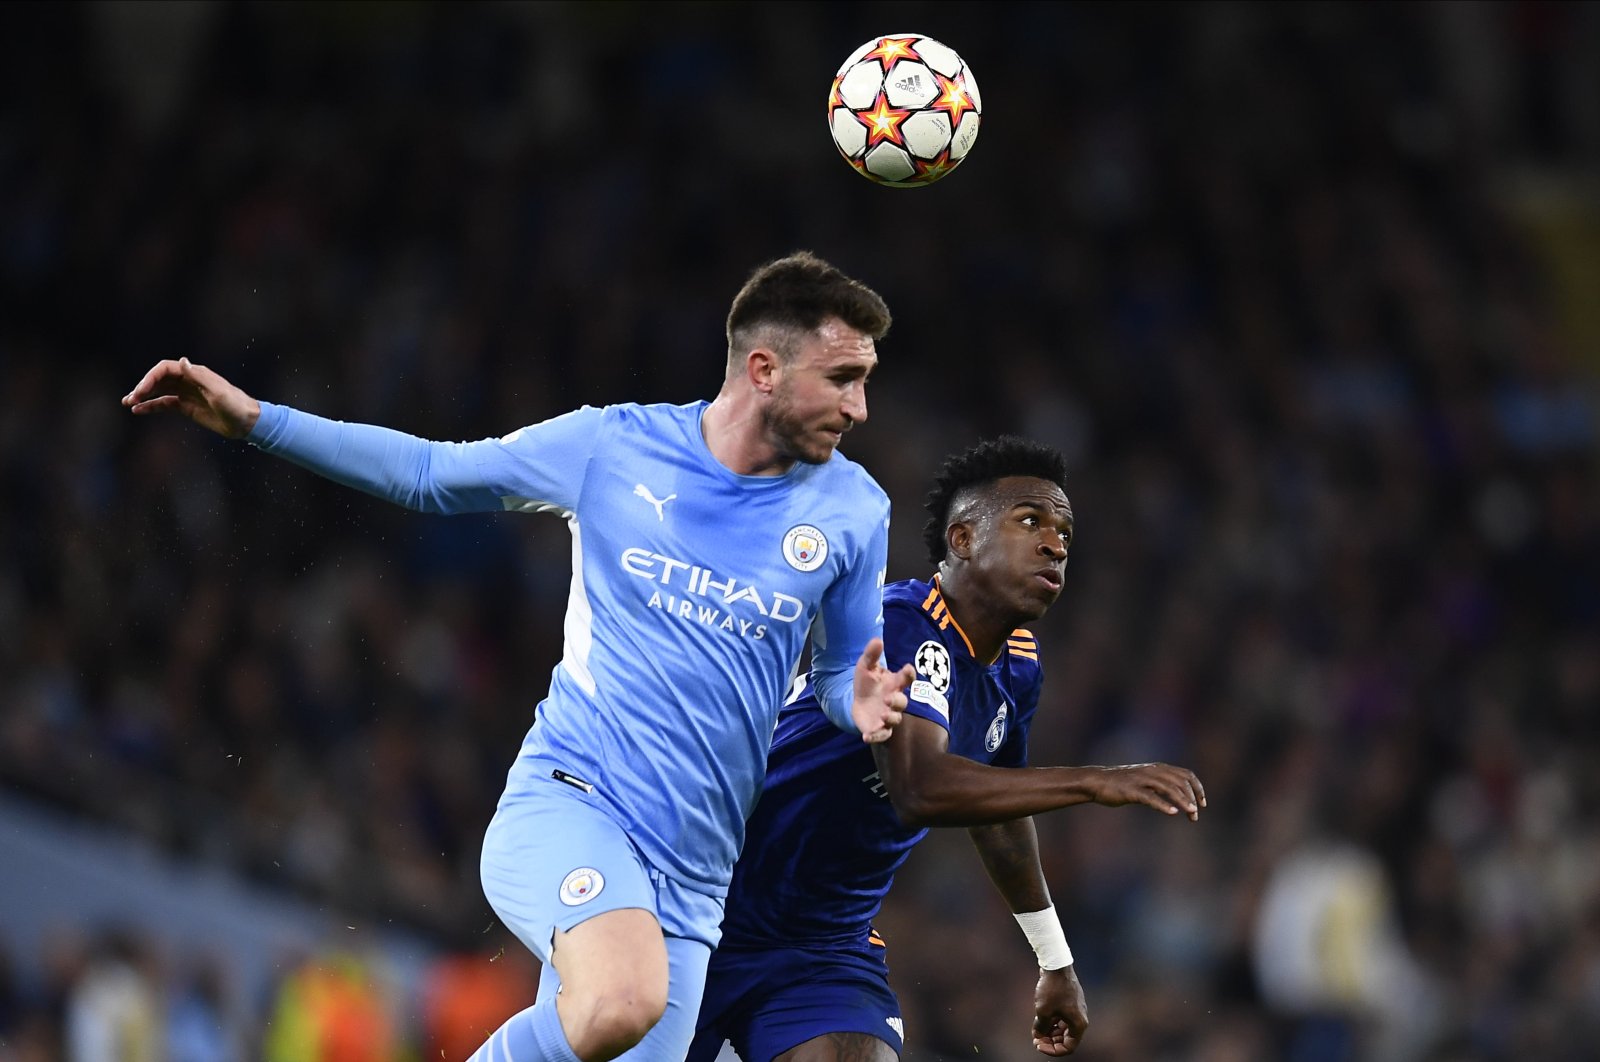 Real&#039;s Vinicius Junior (R) vies with City&#039;s Aymeric Laporte (L) in a Champions League semifinal match, Manchester, England, April 26, 2022. (AA Photo)